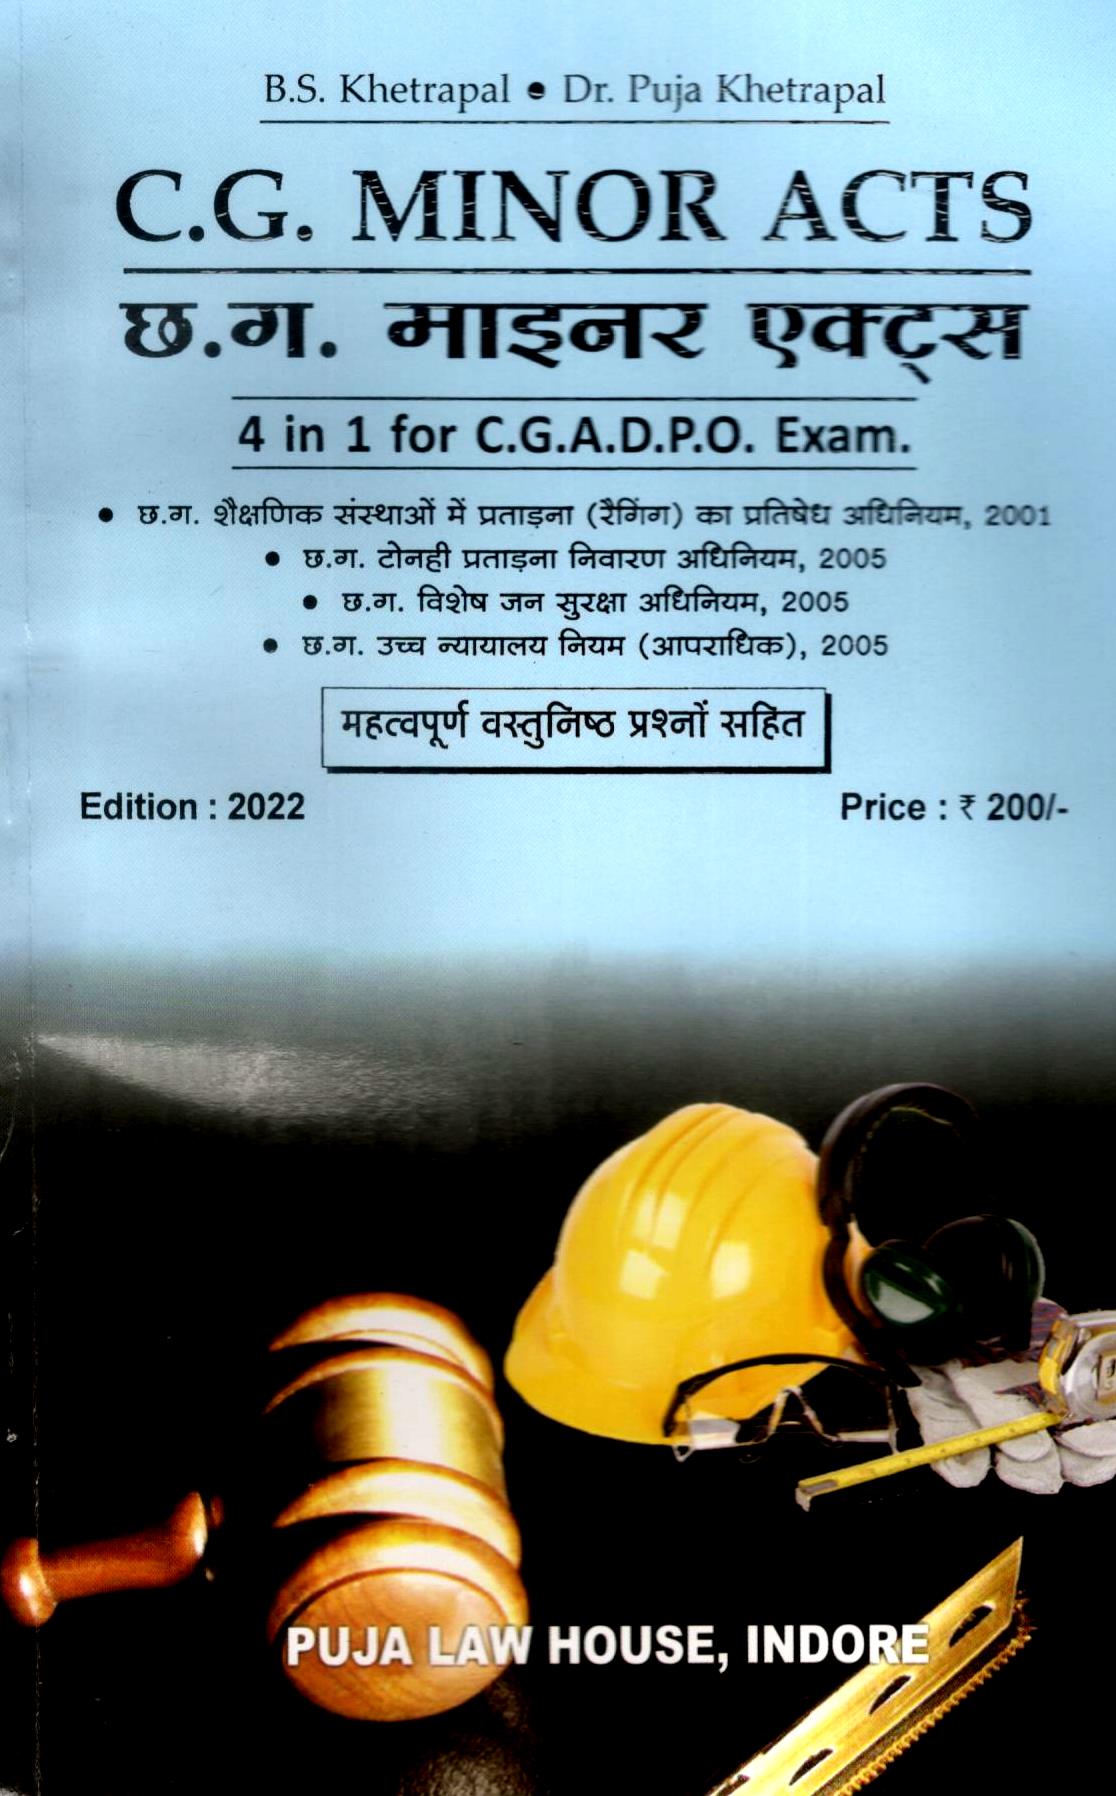 C.G. Minor Acts / छ.ग. माइनर एक्ट्स - 4 in 1 for C.G.A.D.P.O. Exam.